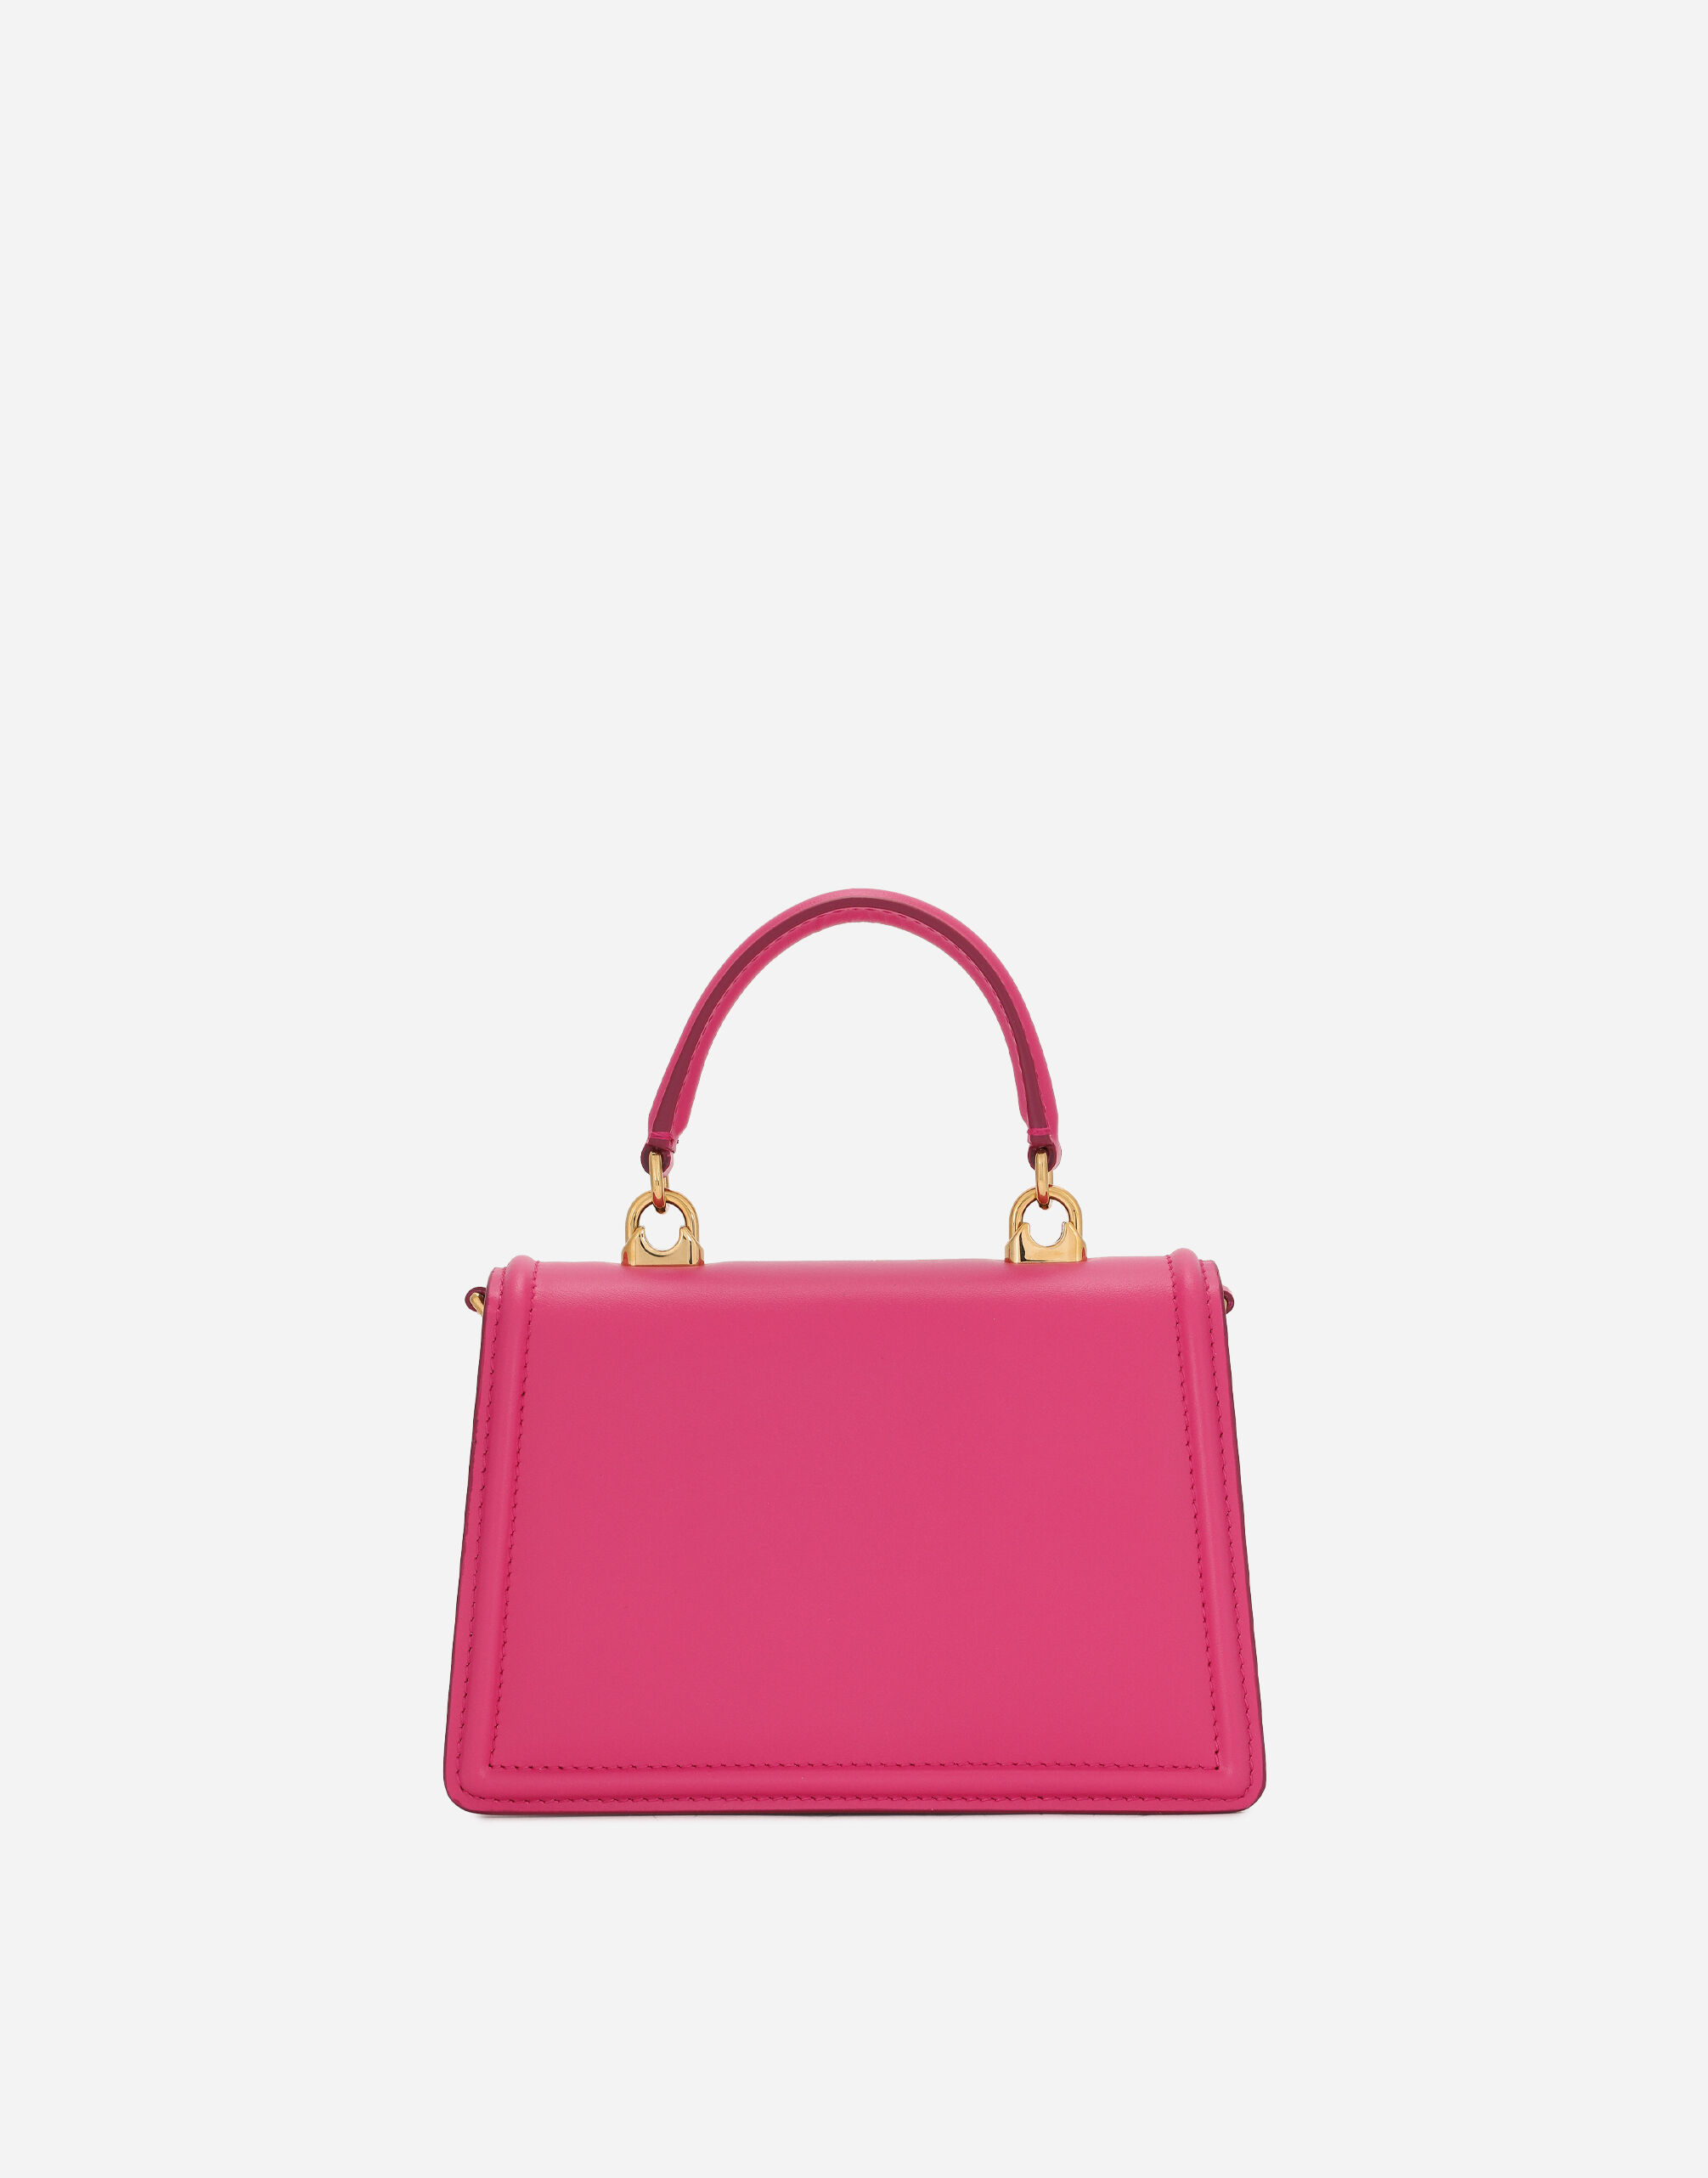 Small calfskin Devotion bag in Pink for | Dolce&Gabbana® US